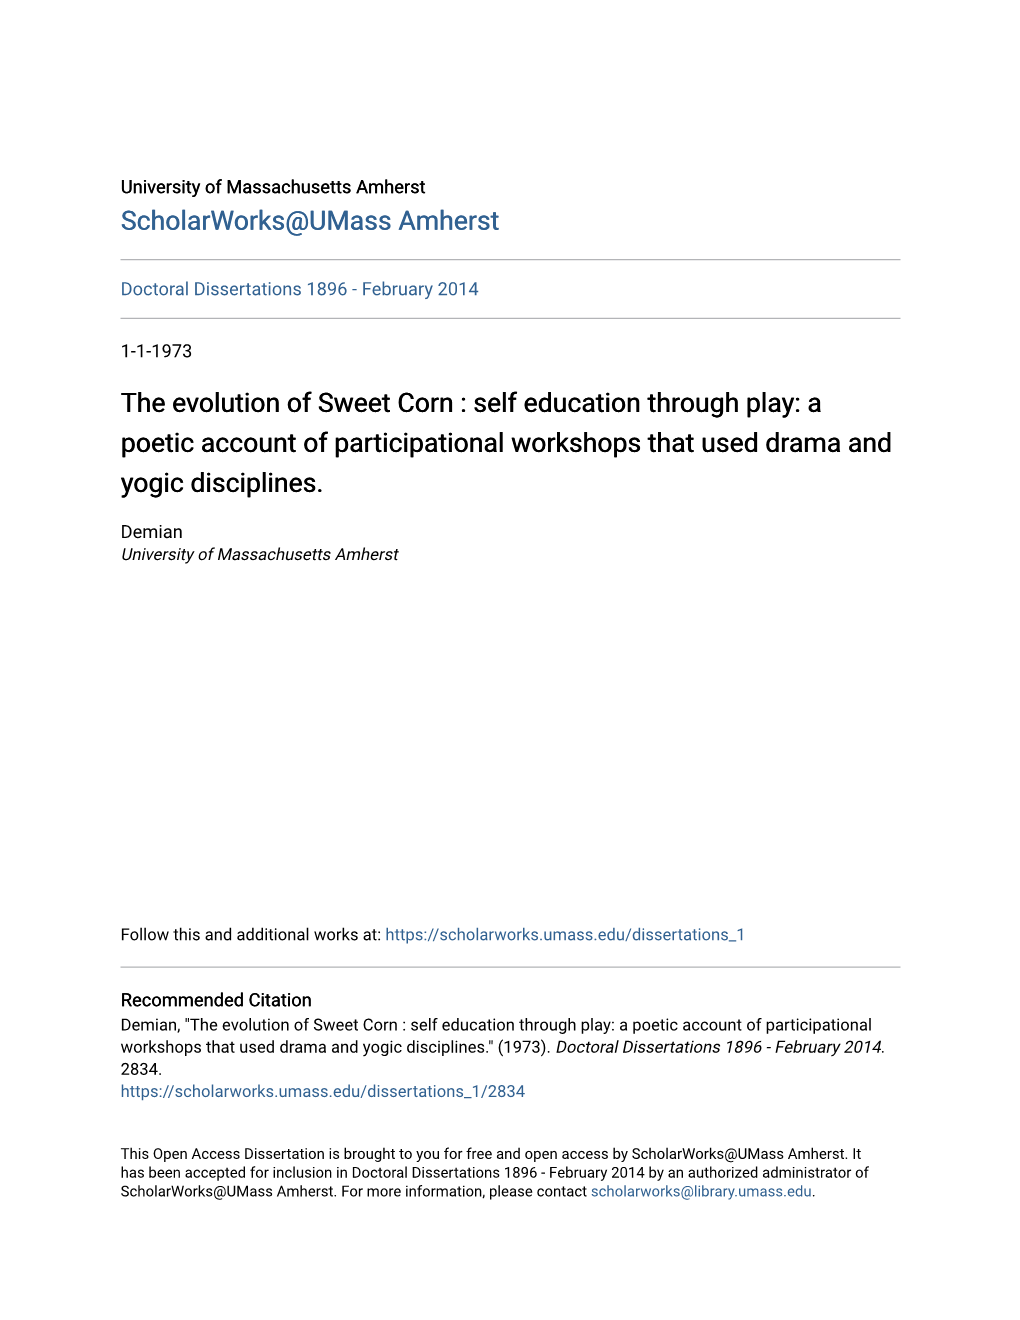 The Evolution of Sweet Corn : Self Education Through Play: a Poetic Account of Participational Workshops That Used Drama and Yogic Disciplines